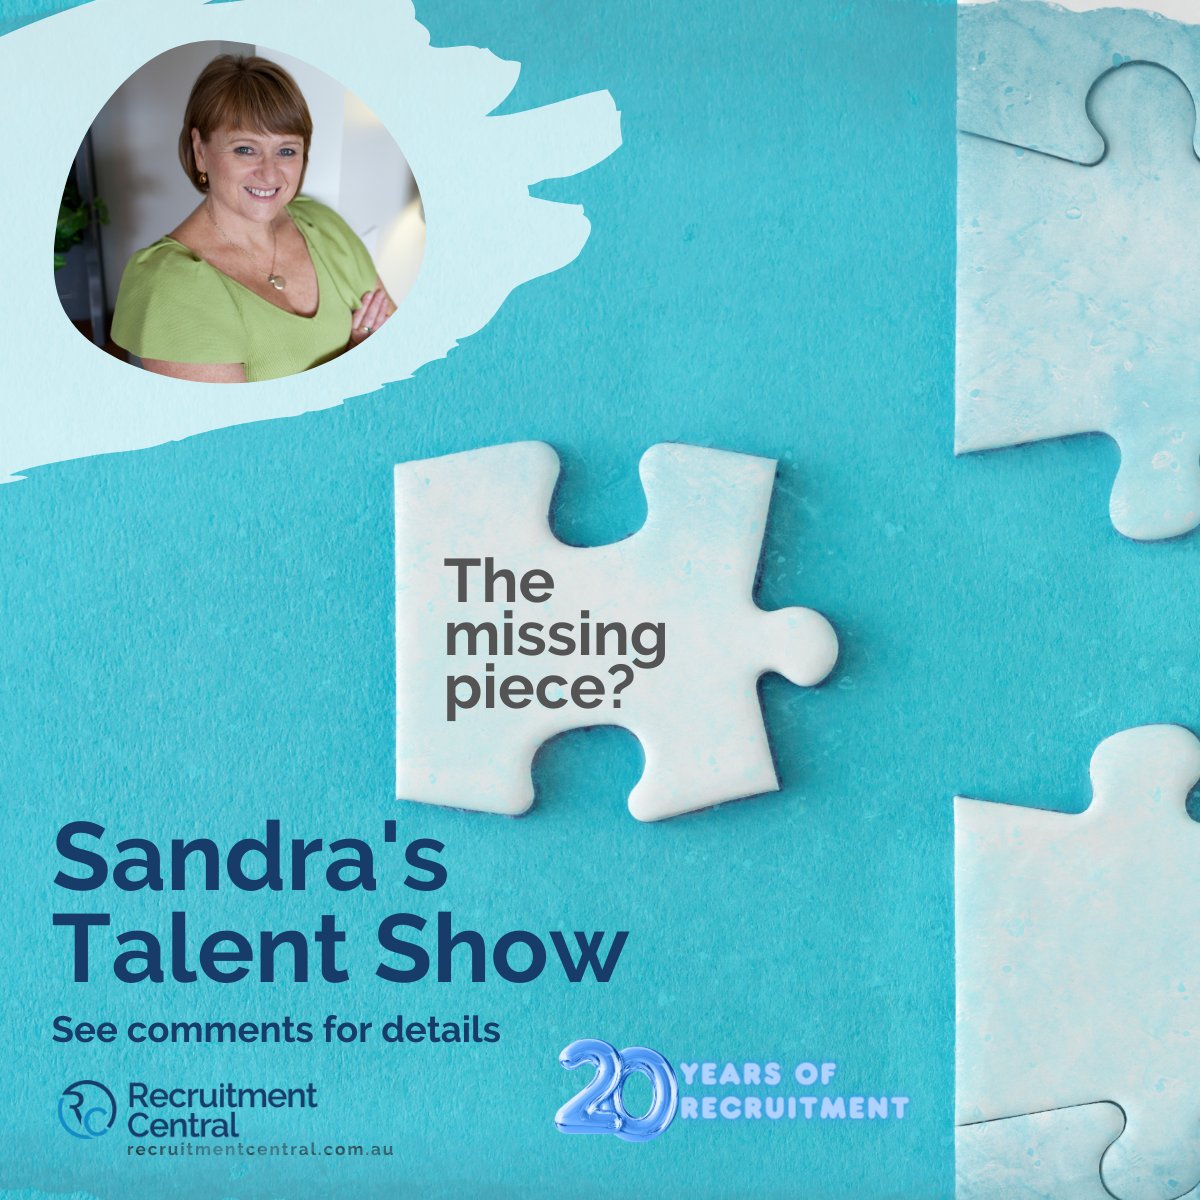 We want to make hiring easier. Finding ambitious, talented people is never easy. We make it our top priority to put forward the best talent for you. Reach out to Sandra directly - sandra@recruitmentcentral.com.au.

#talentshow #recruitment #newstaff #brisbanerecruitment